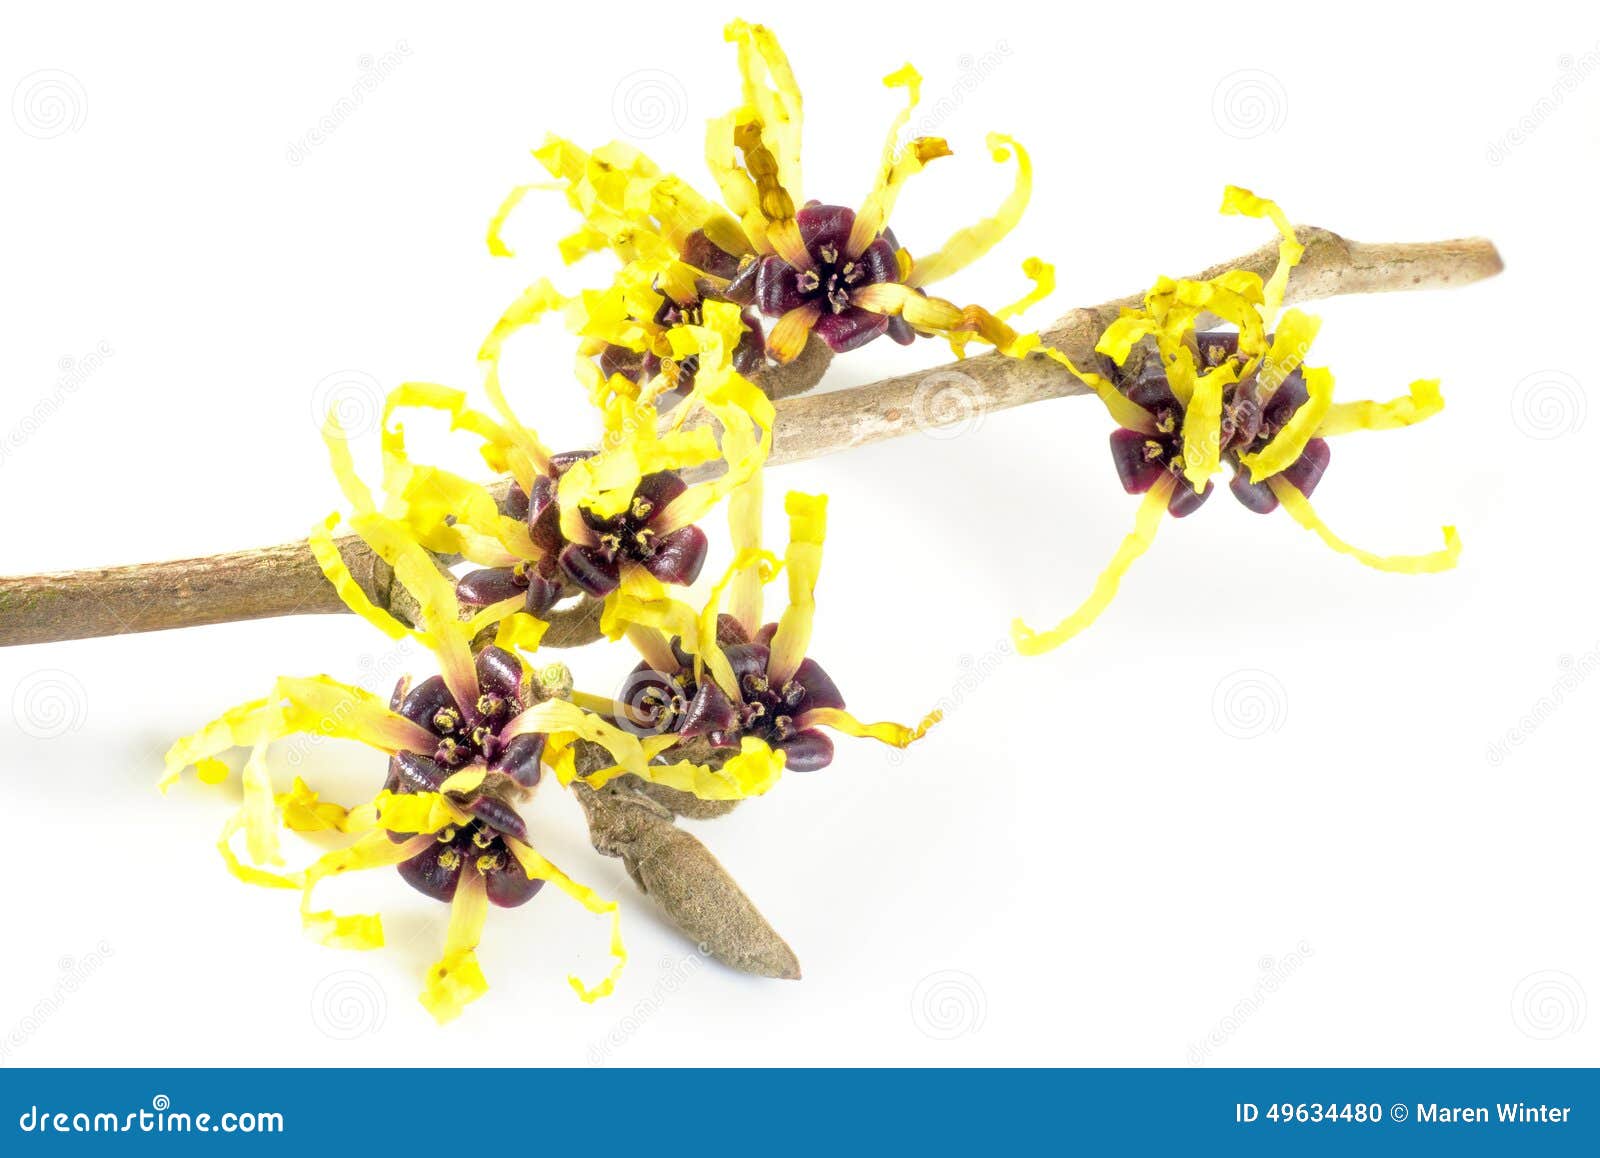 witch hazel in bloom  on white background